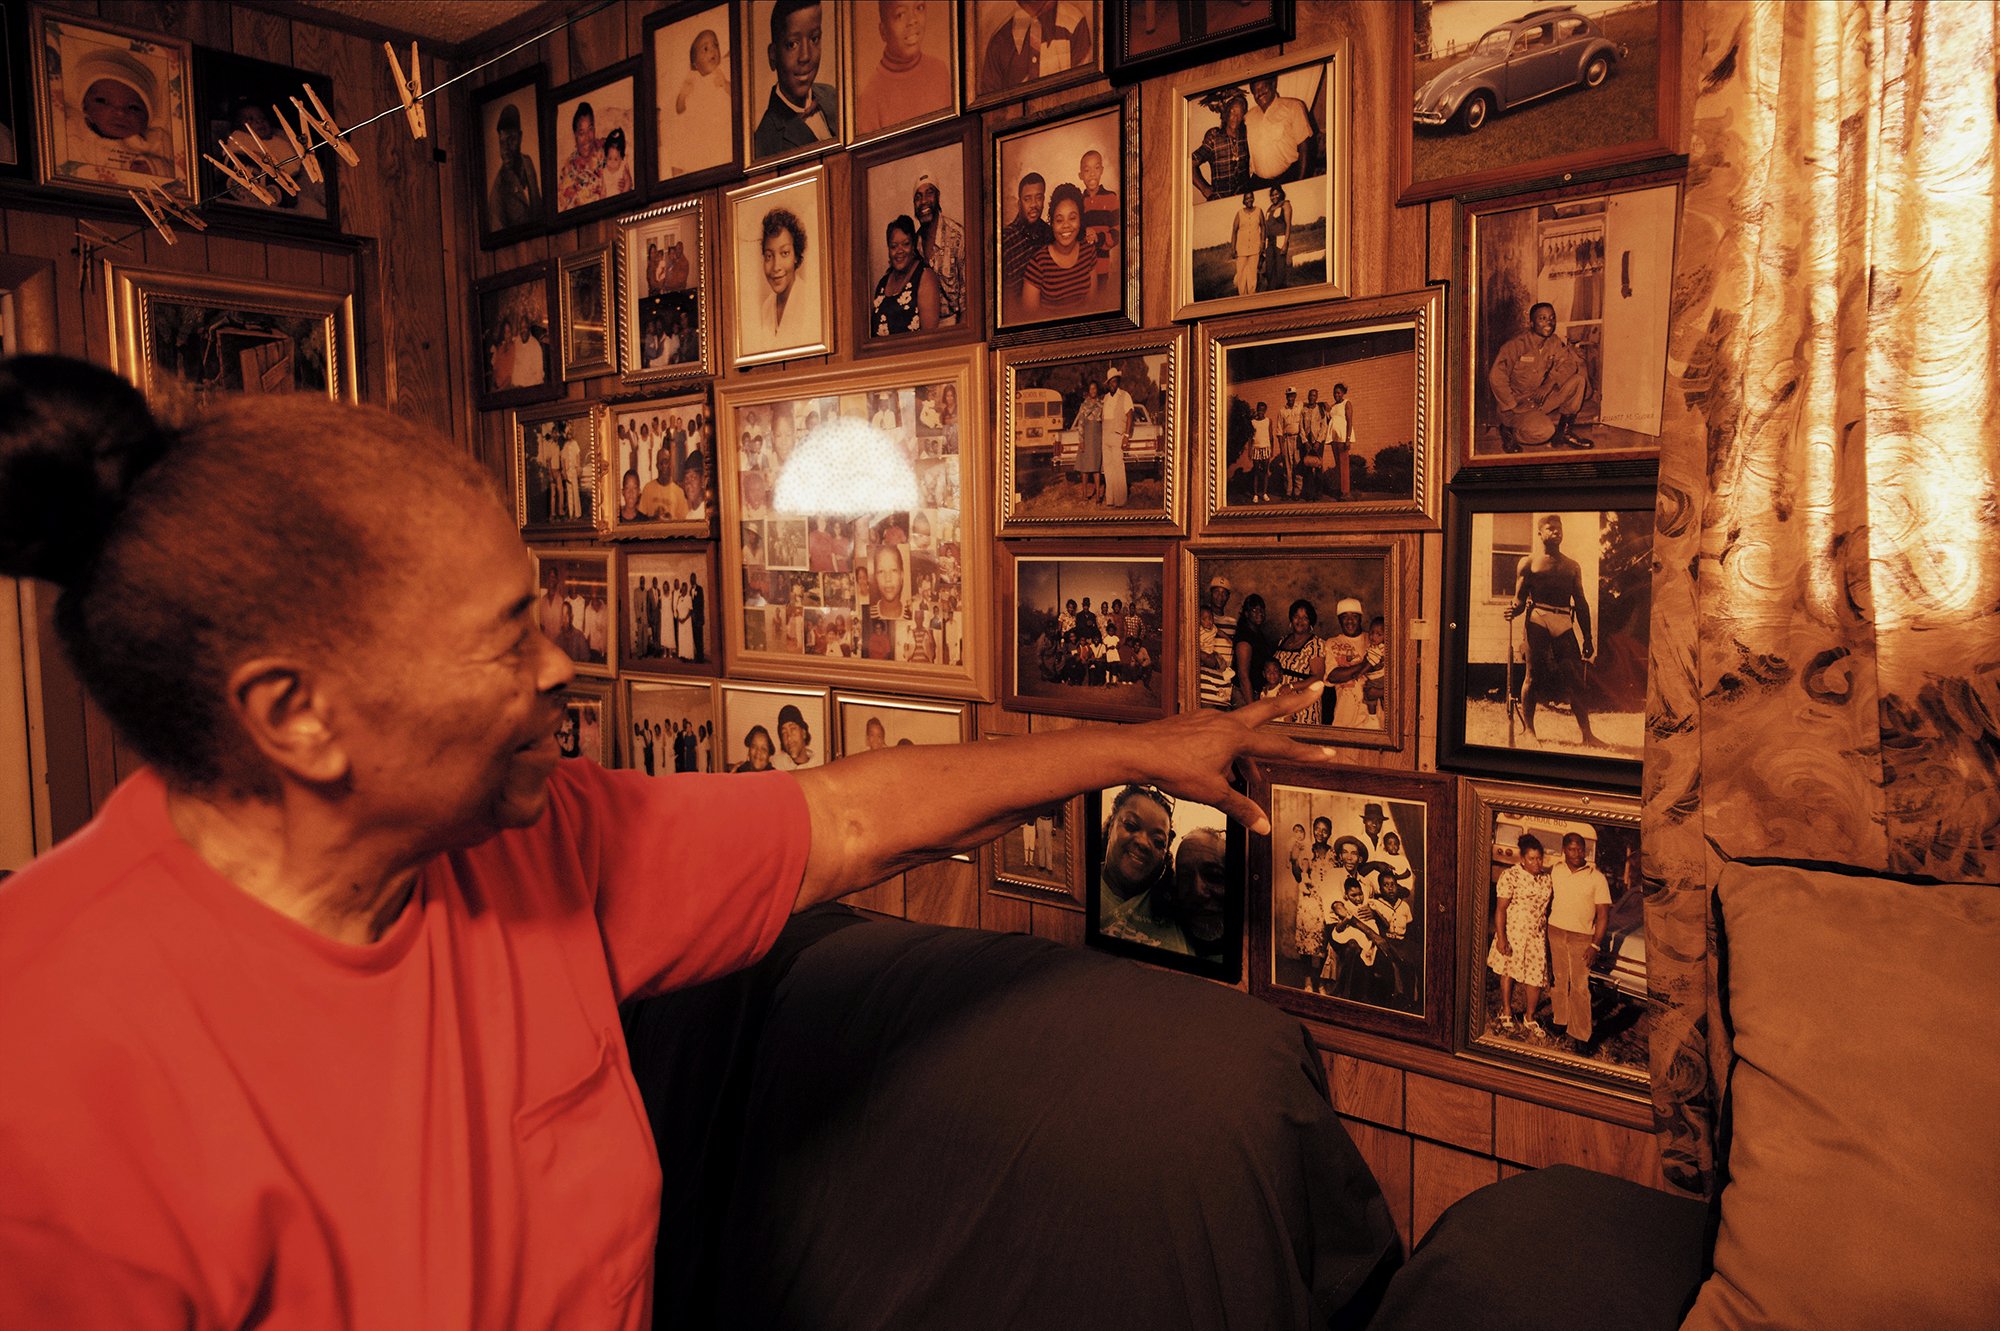 The lady pointing at one of the many family photos on the wall.